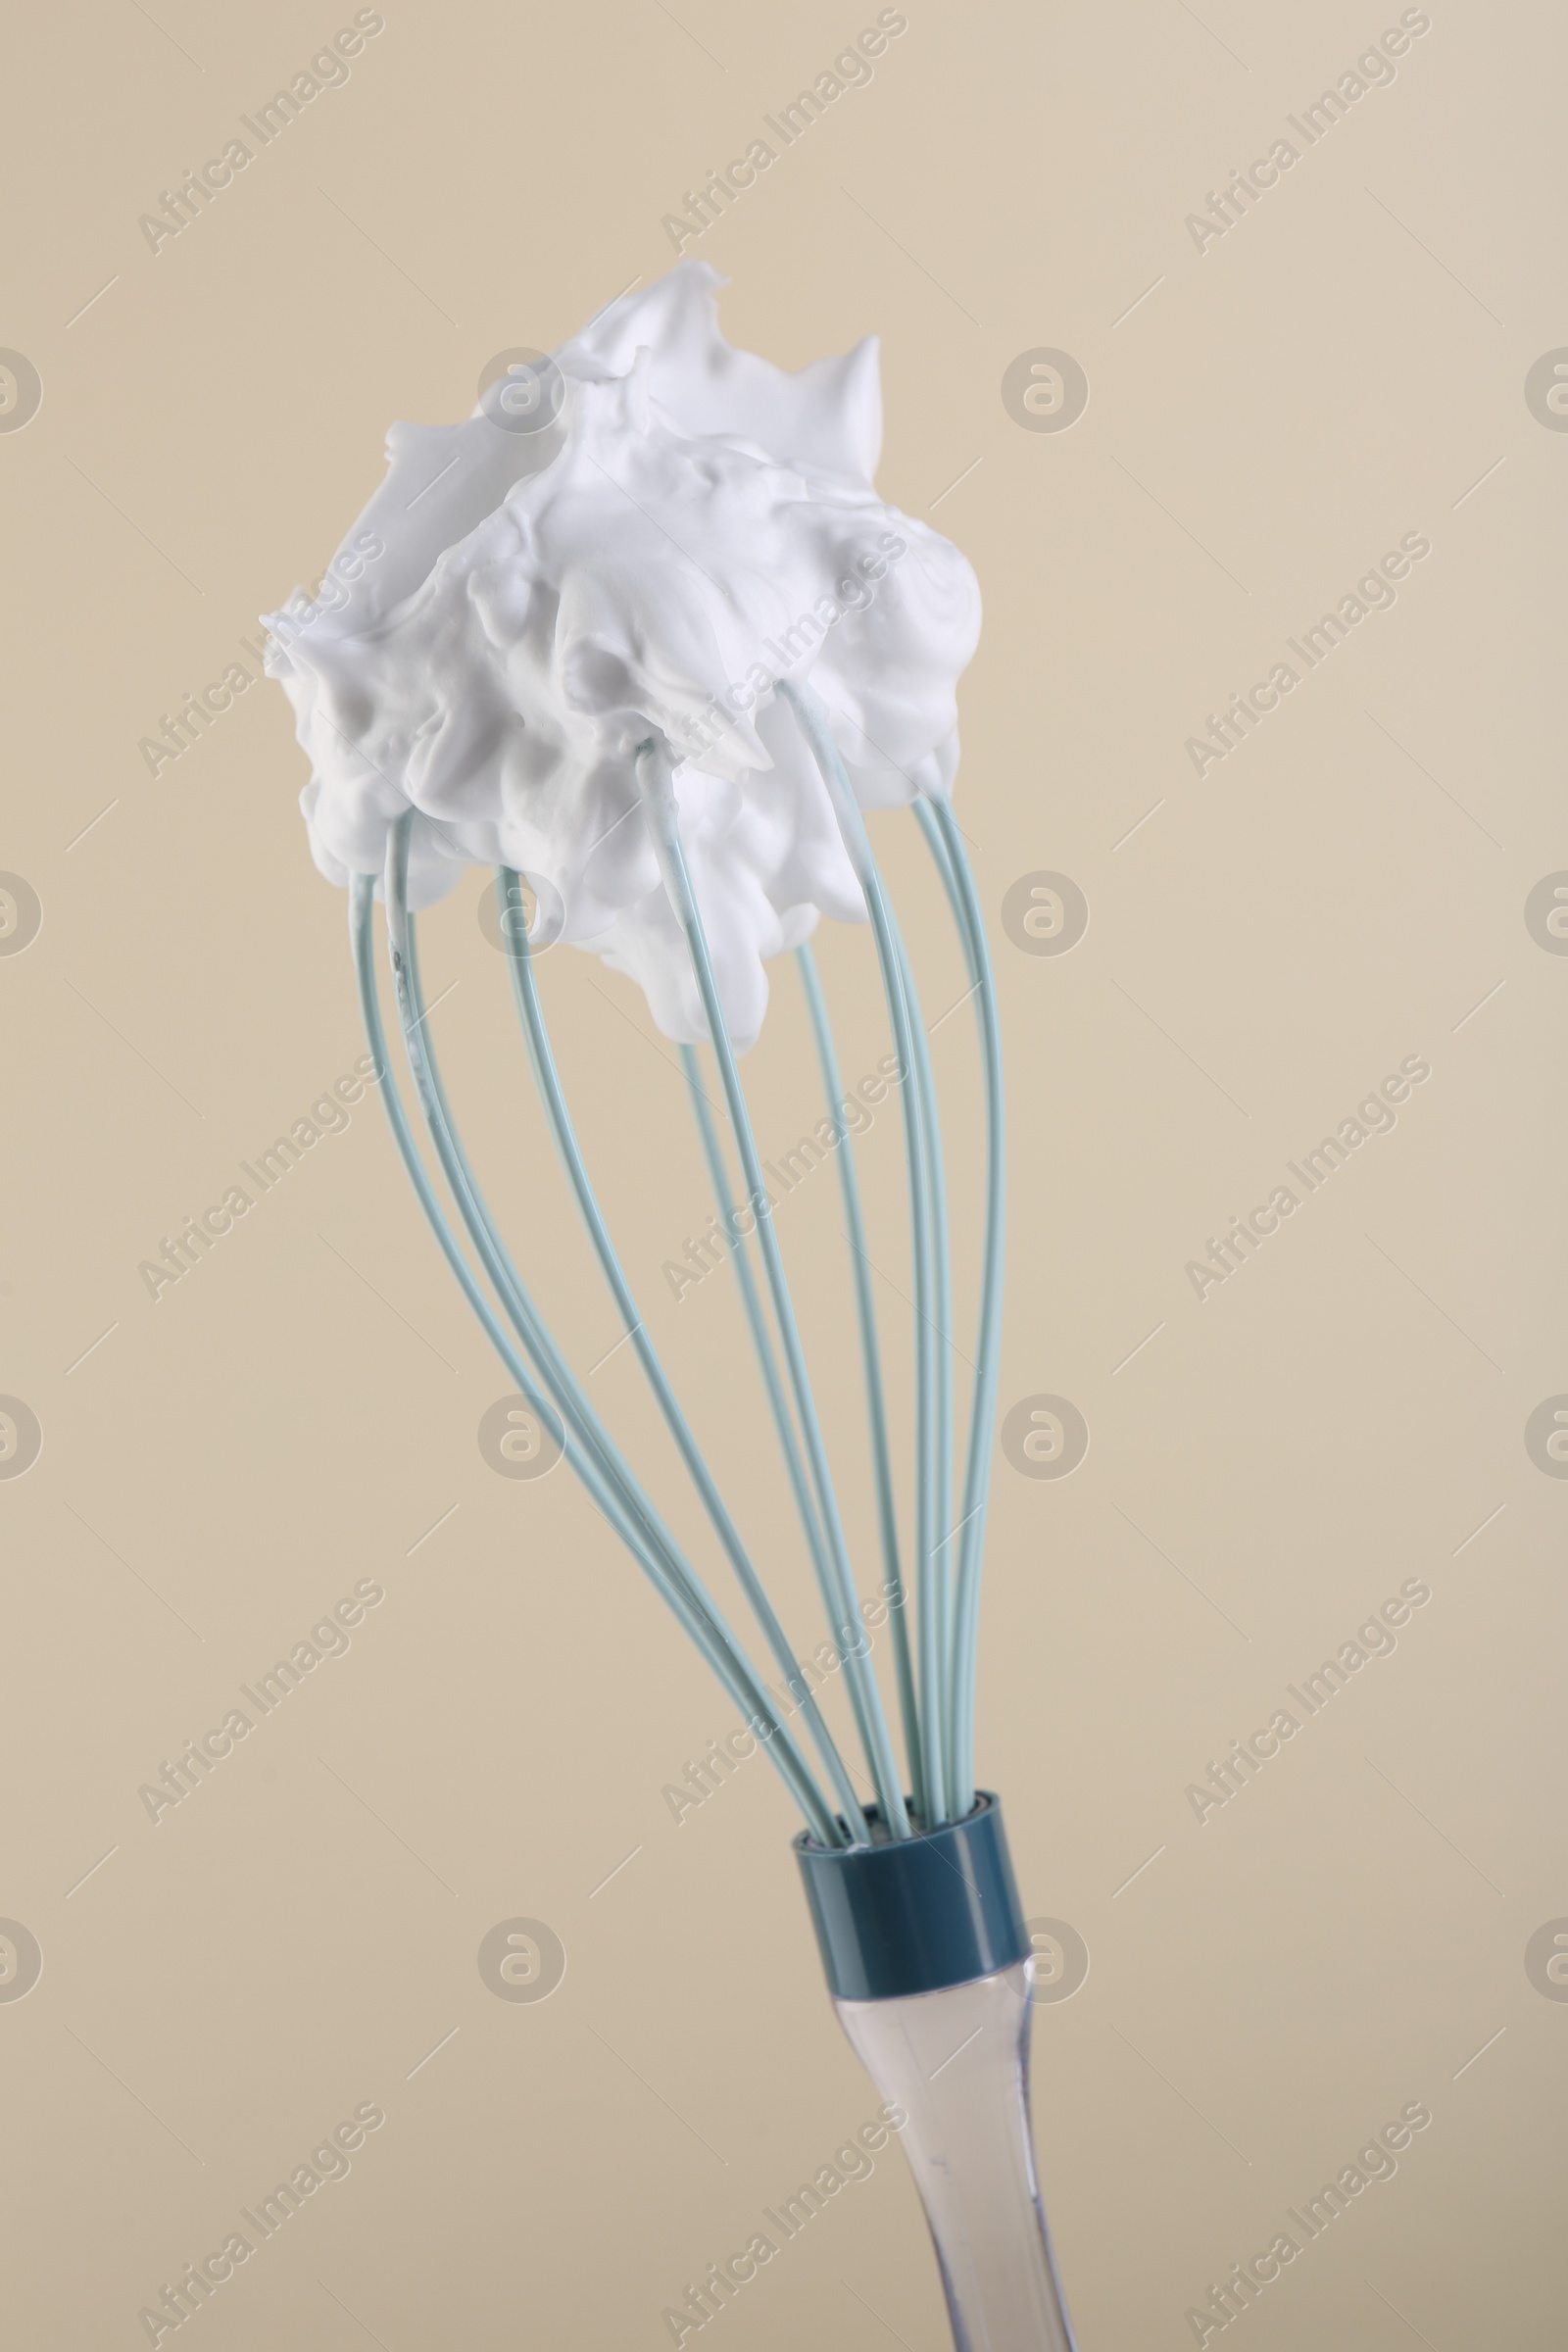 Photo of Whisk with whipped cream on beige background